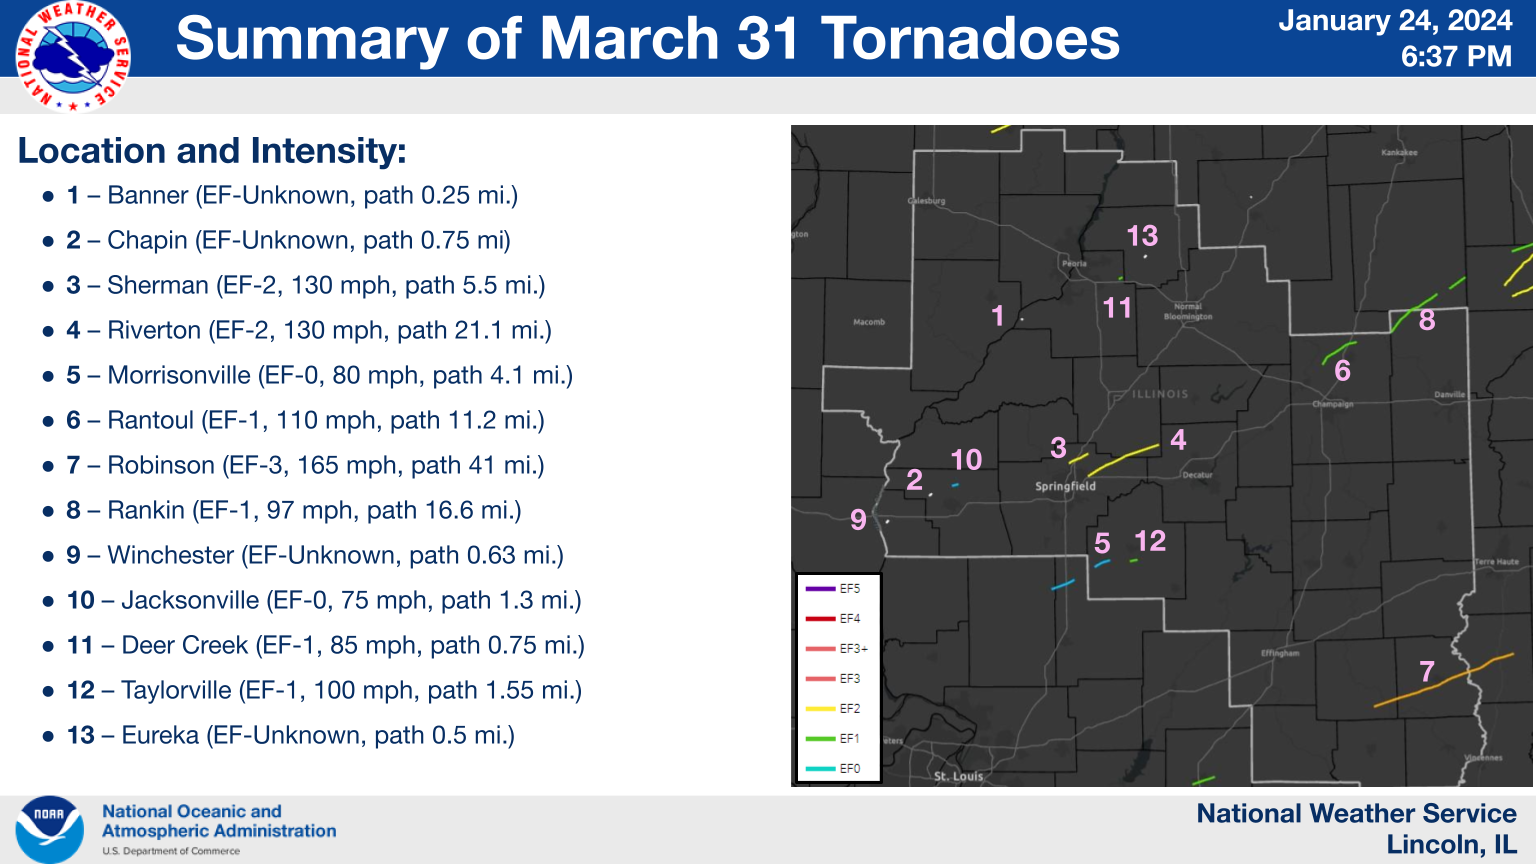 Summary of tornadoes in the Lincoln NWS coverage area